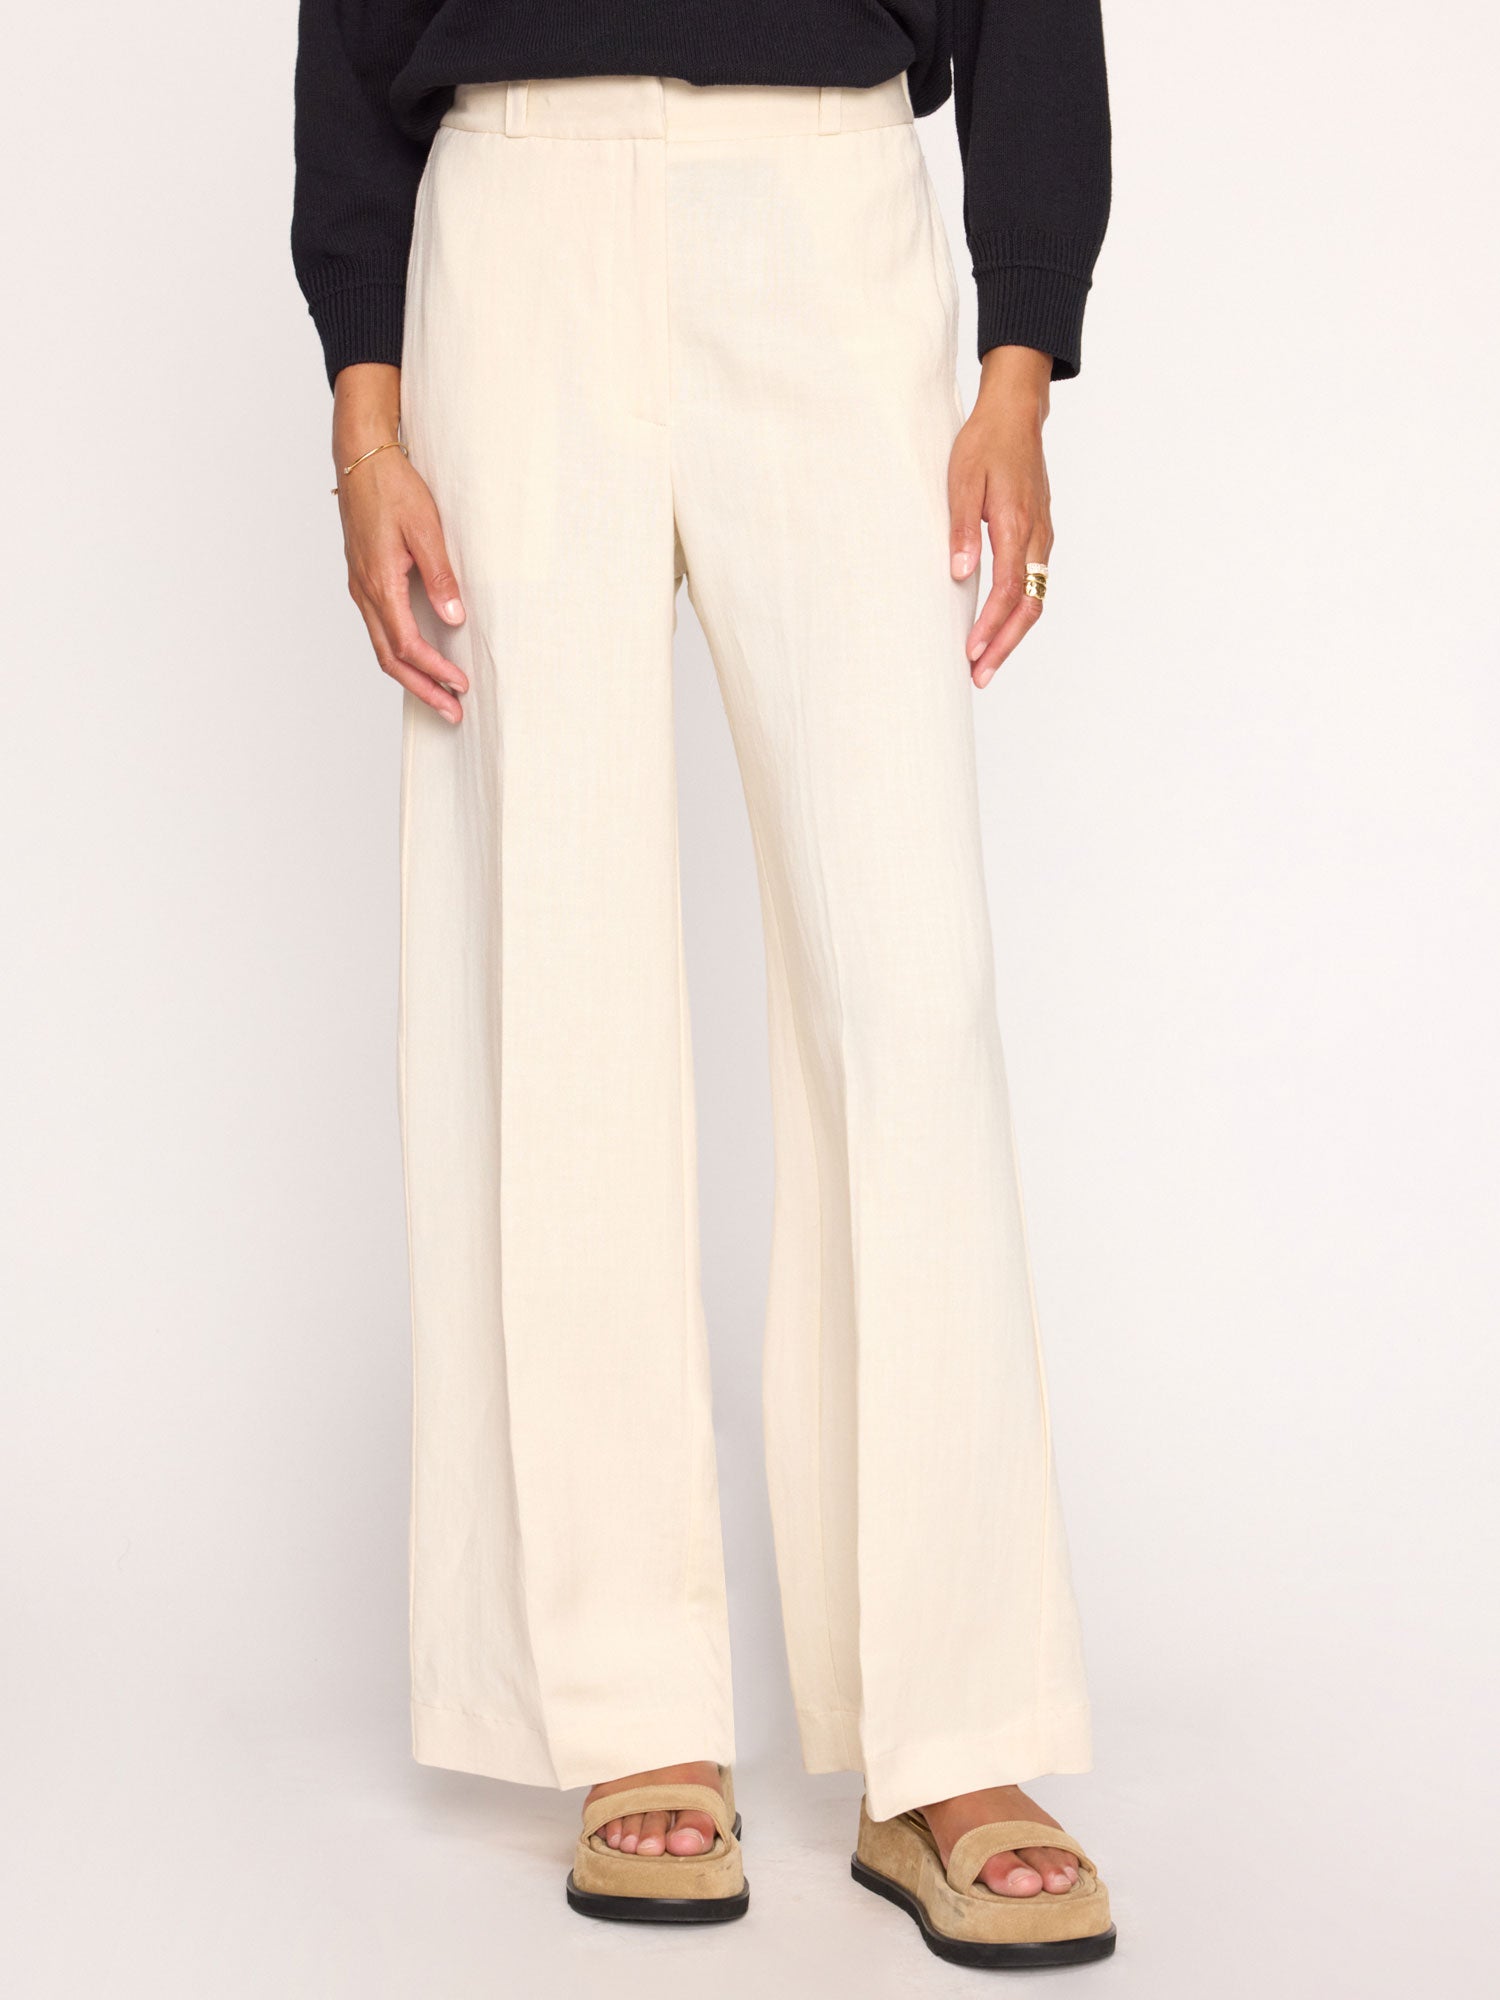 Women's Areo Pant in Egret